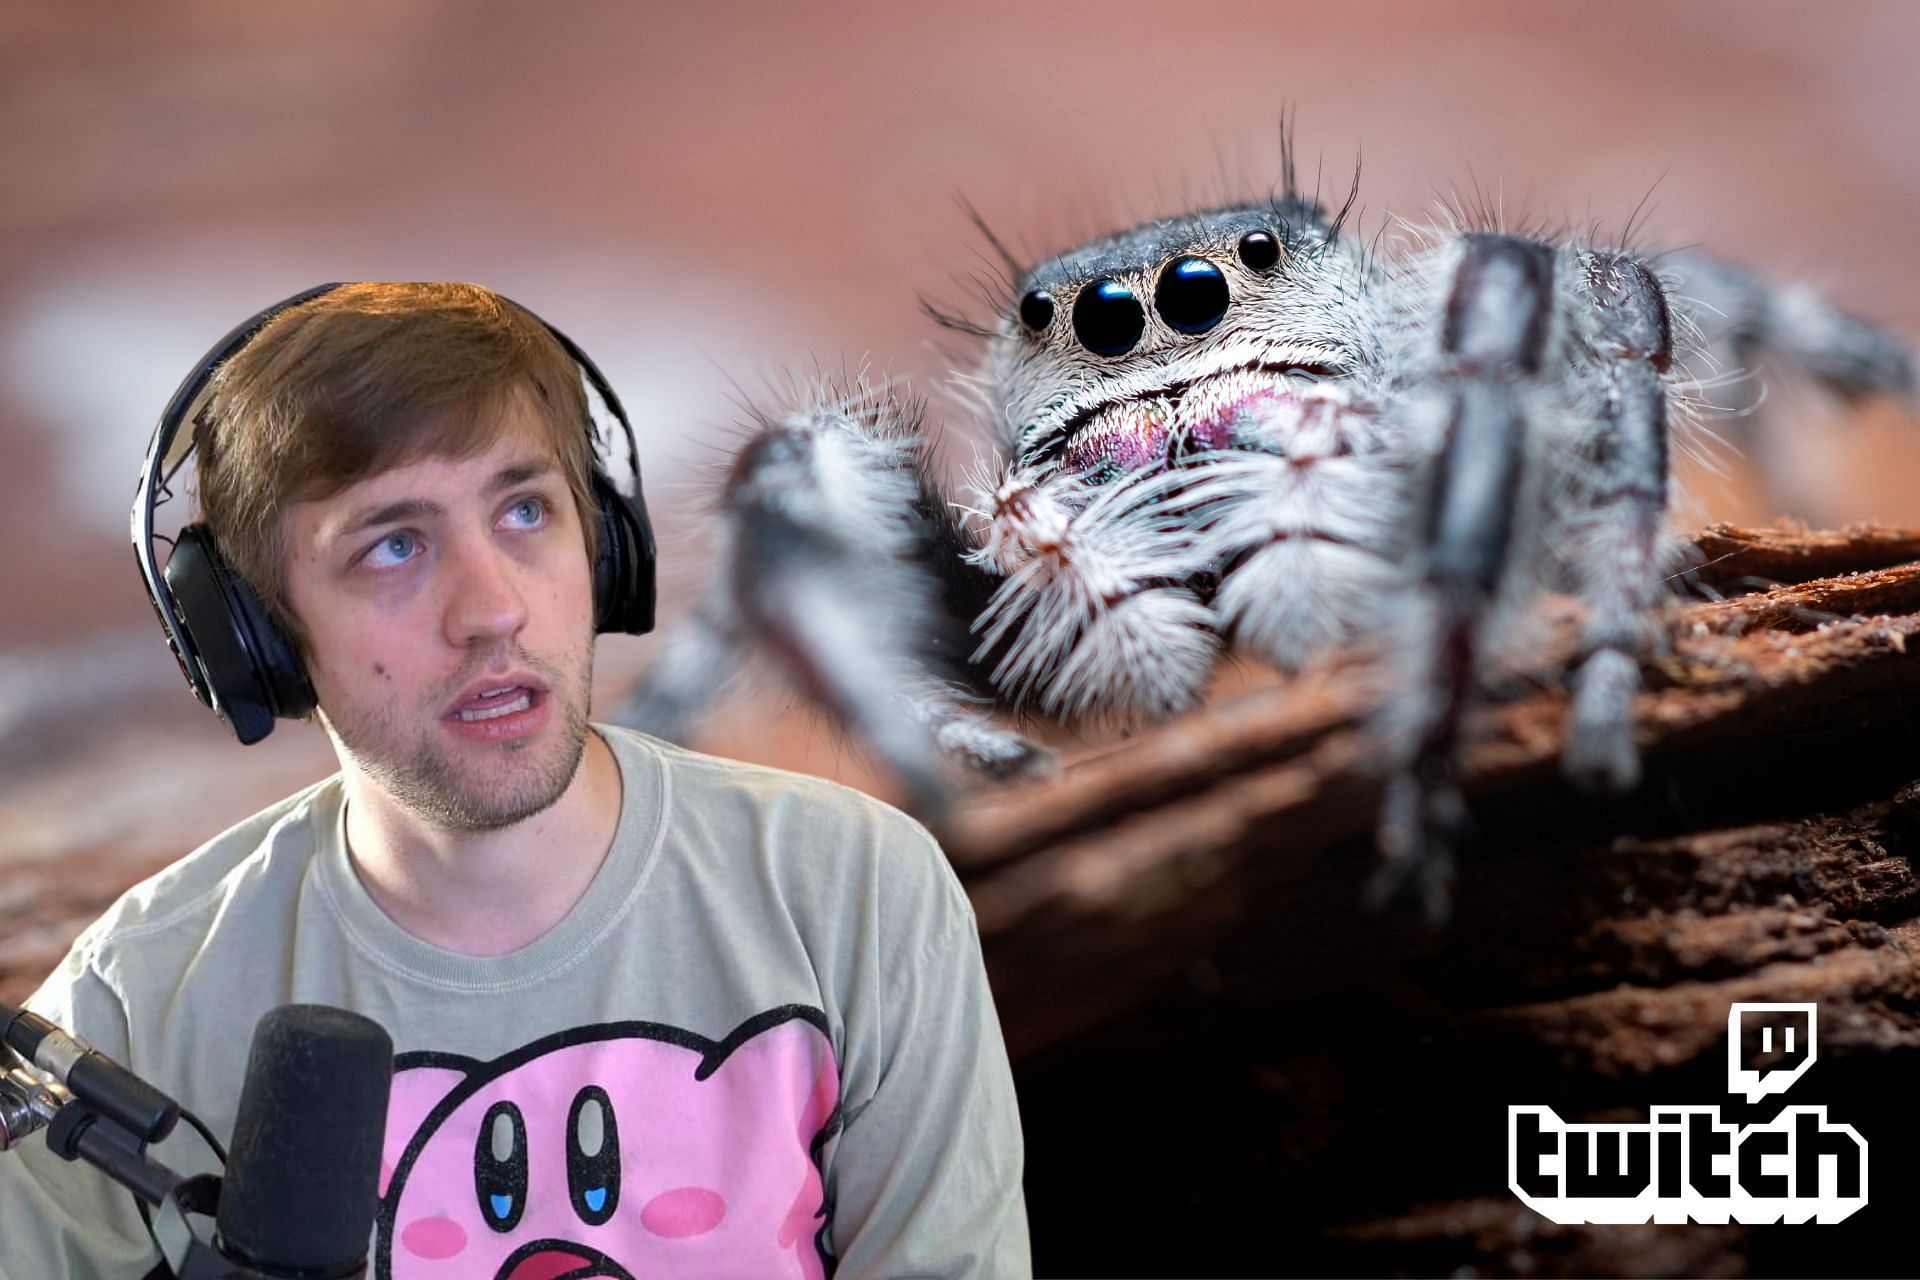 Sodapoppin gets scared after reacting to a spider on stream (Image via Sportskeeda)